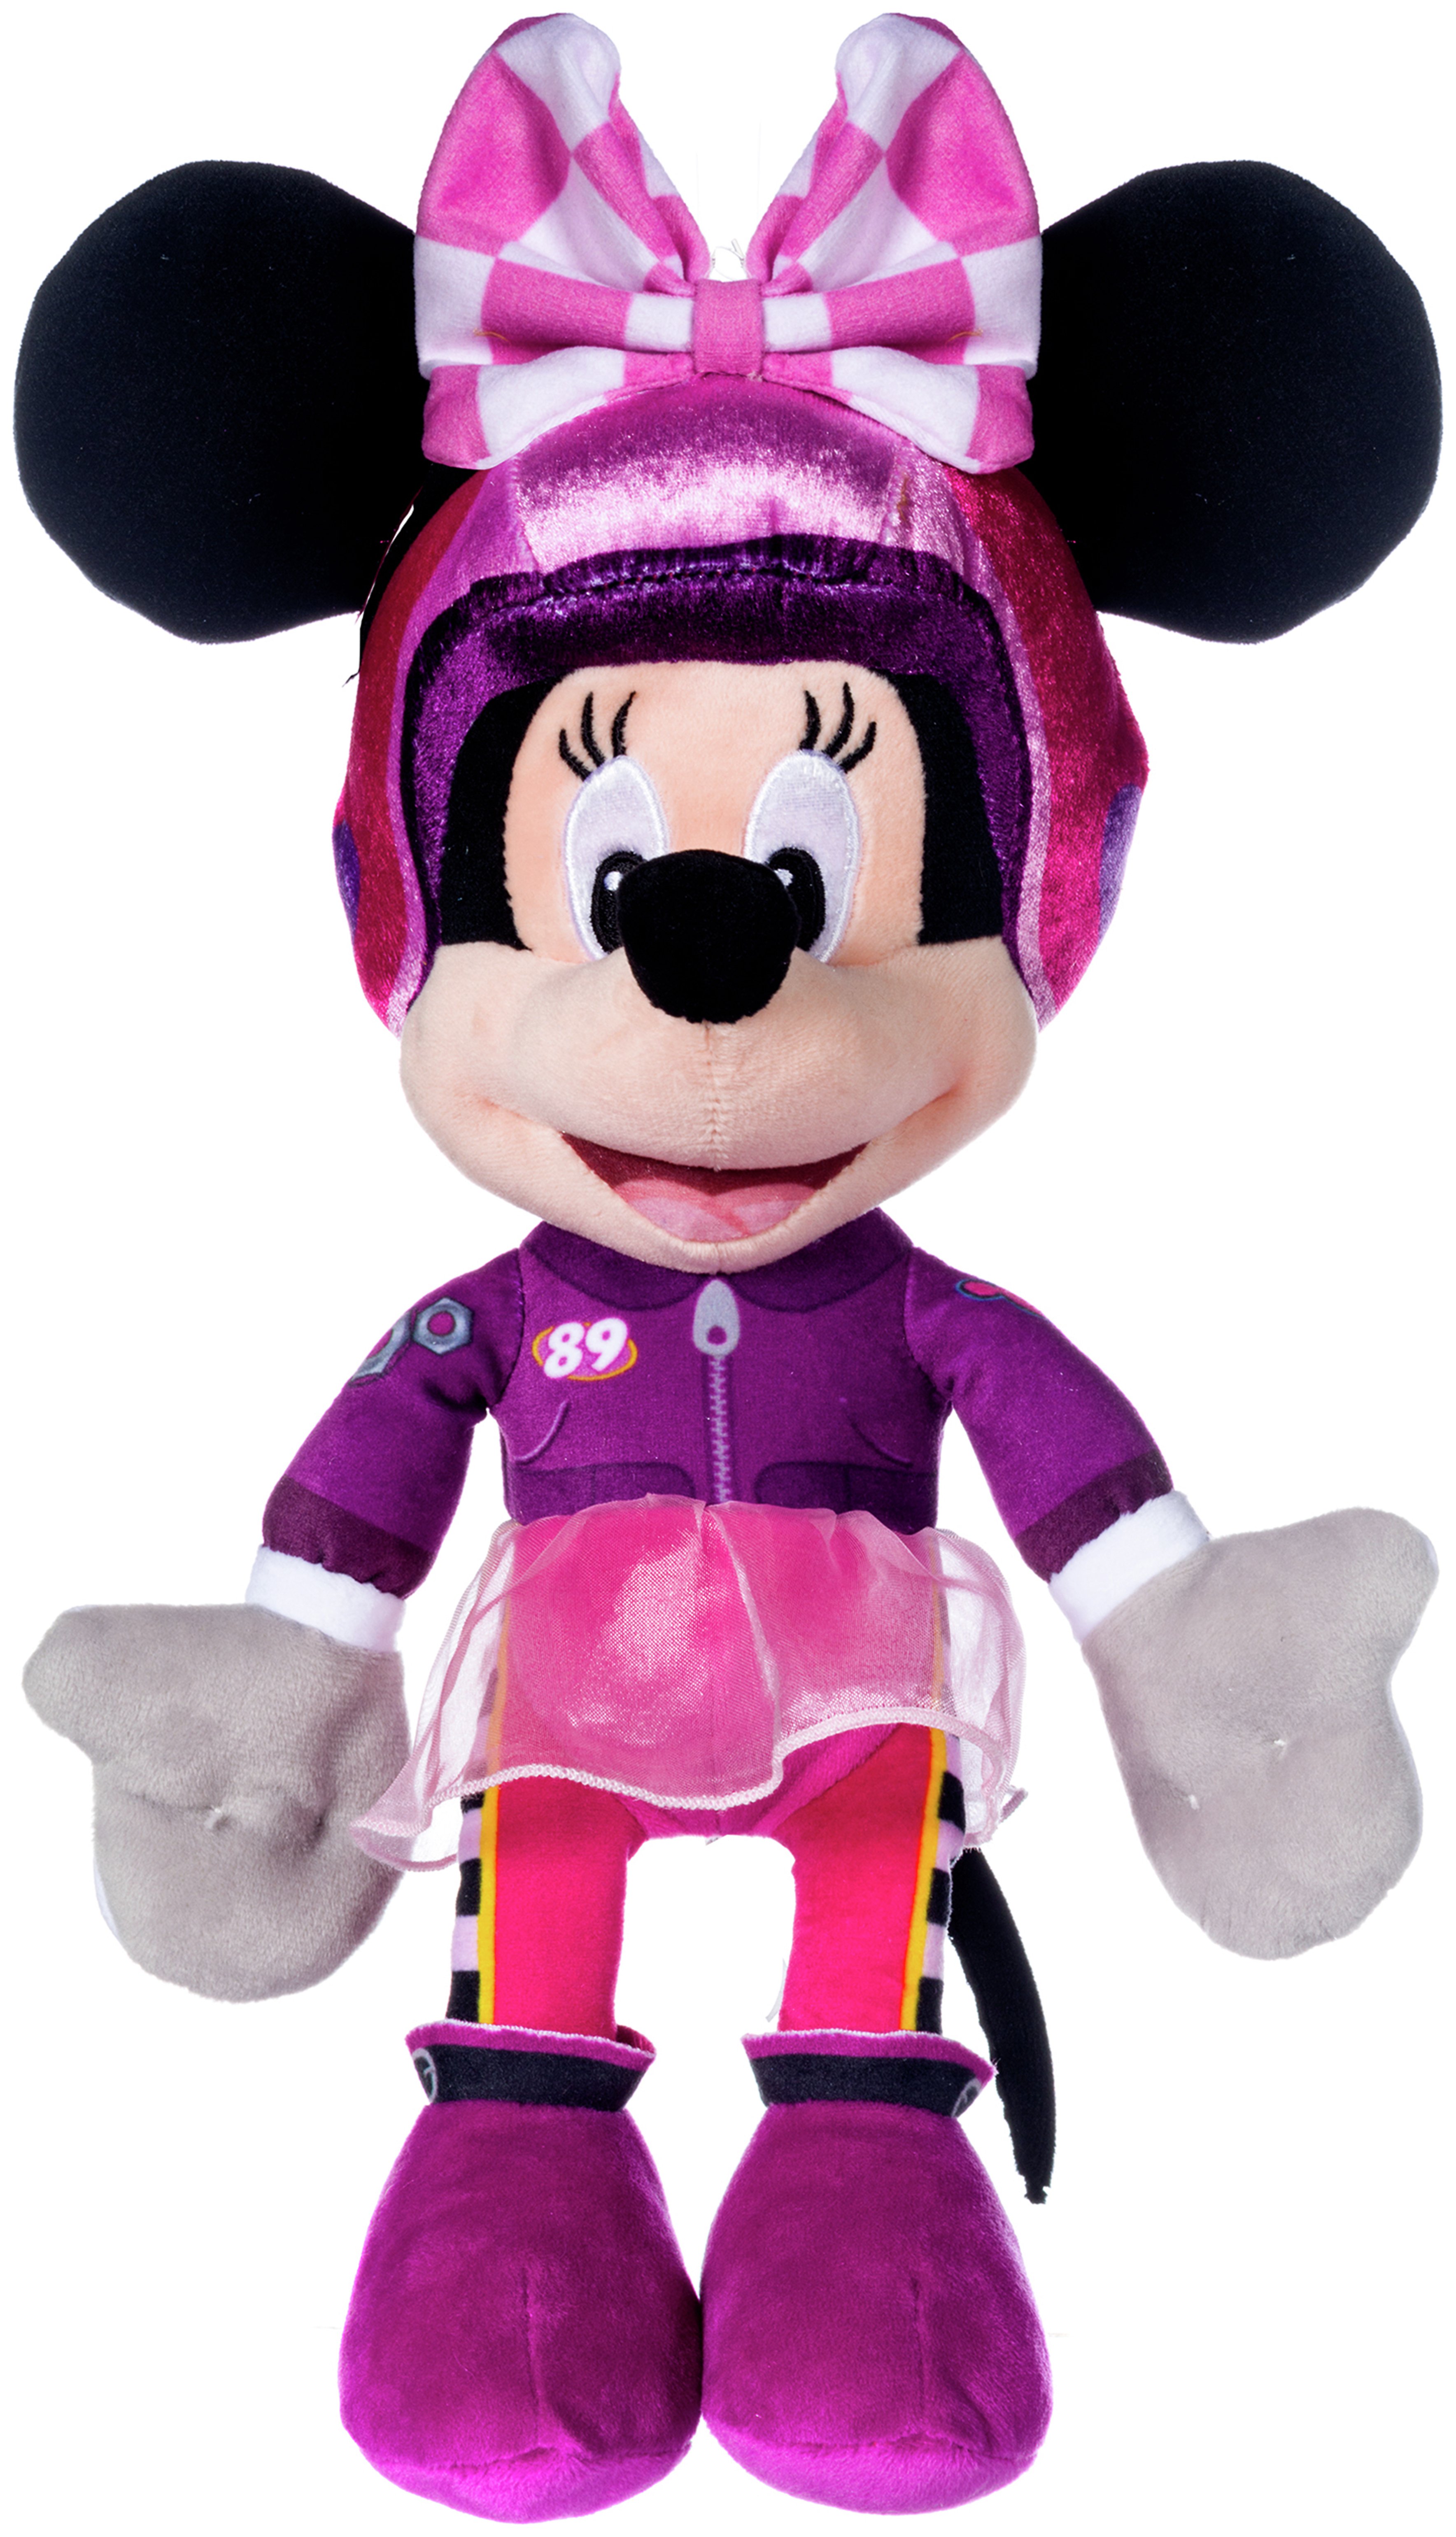 Disney Mickey and the Roadster Racers Minnie Mouse Soft Toy review